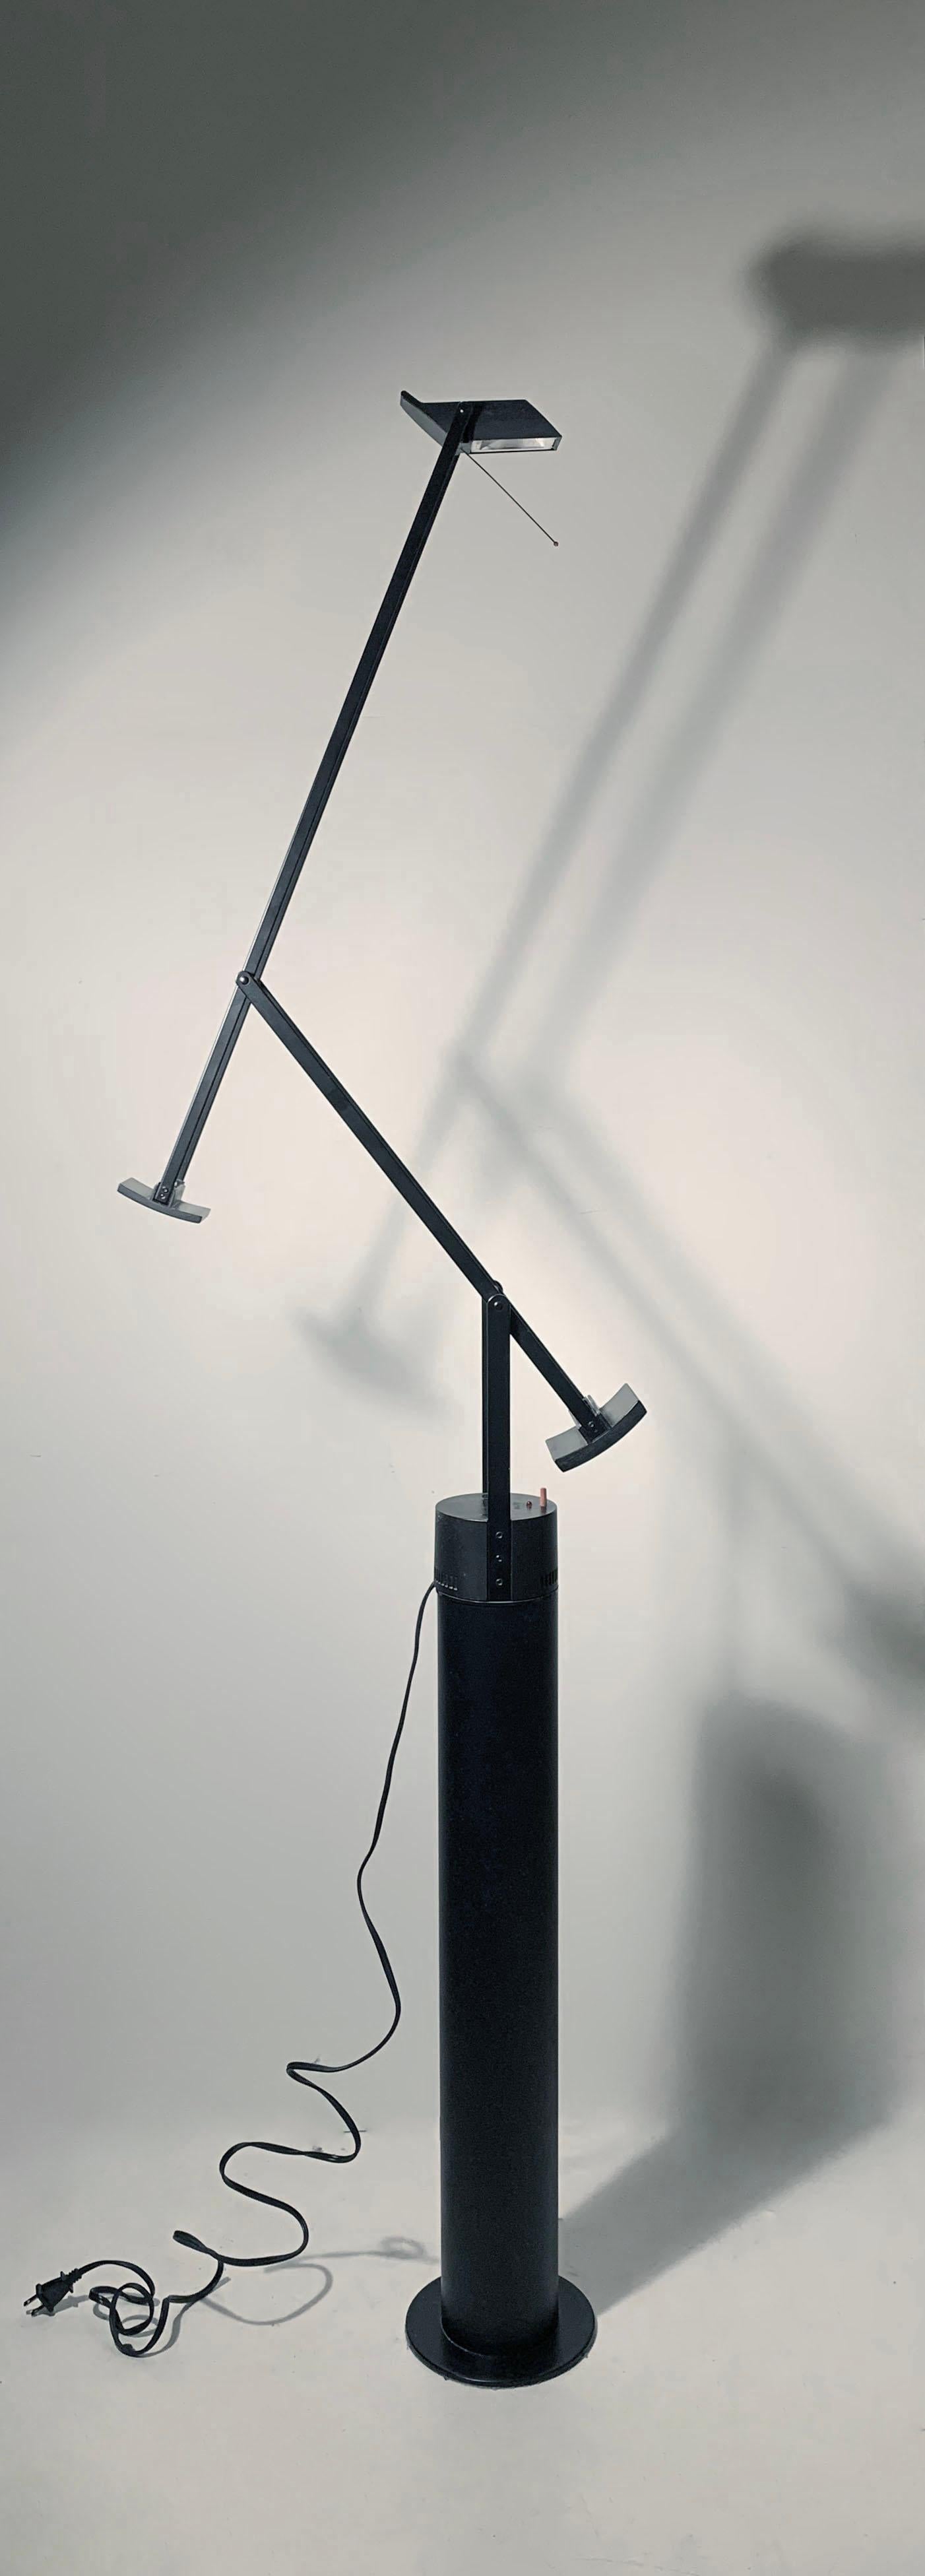 The Tizio Plus lamp with Floor Support was designed by Richard Sapper for Artemide. The Tizio Plus table model mounted on a steel cylindrical floor support.

This is an original vintage version.